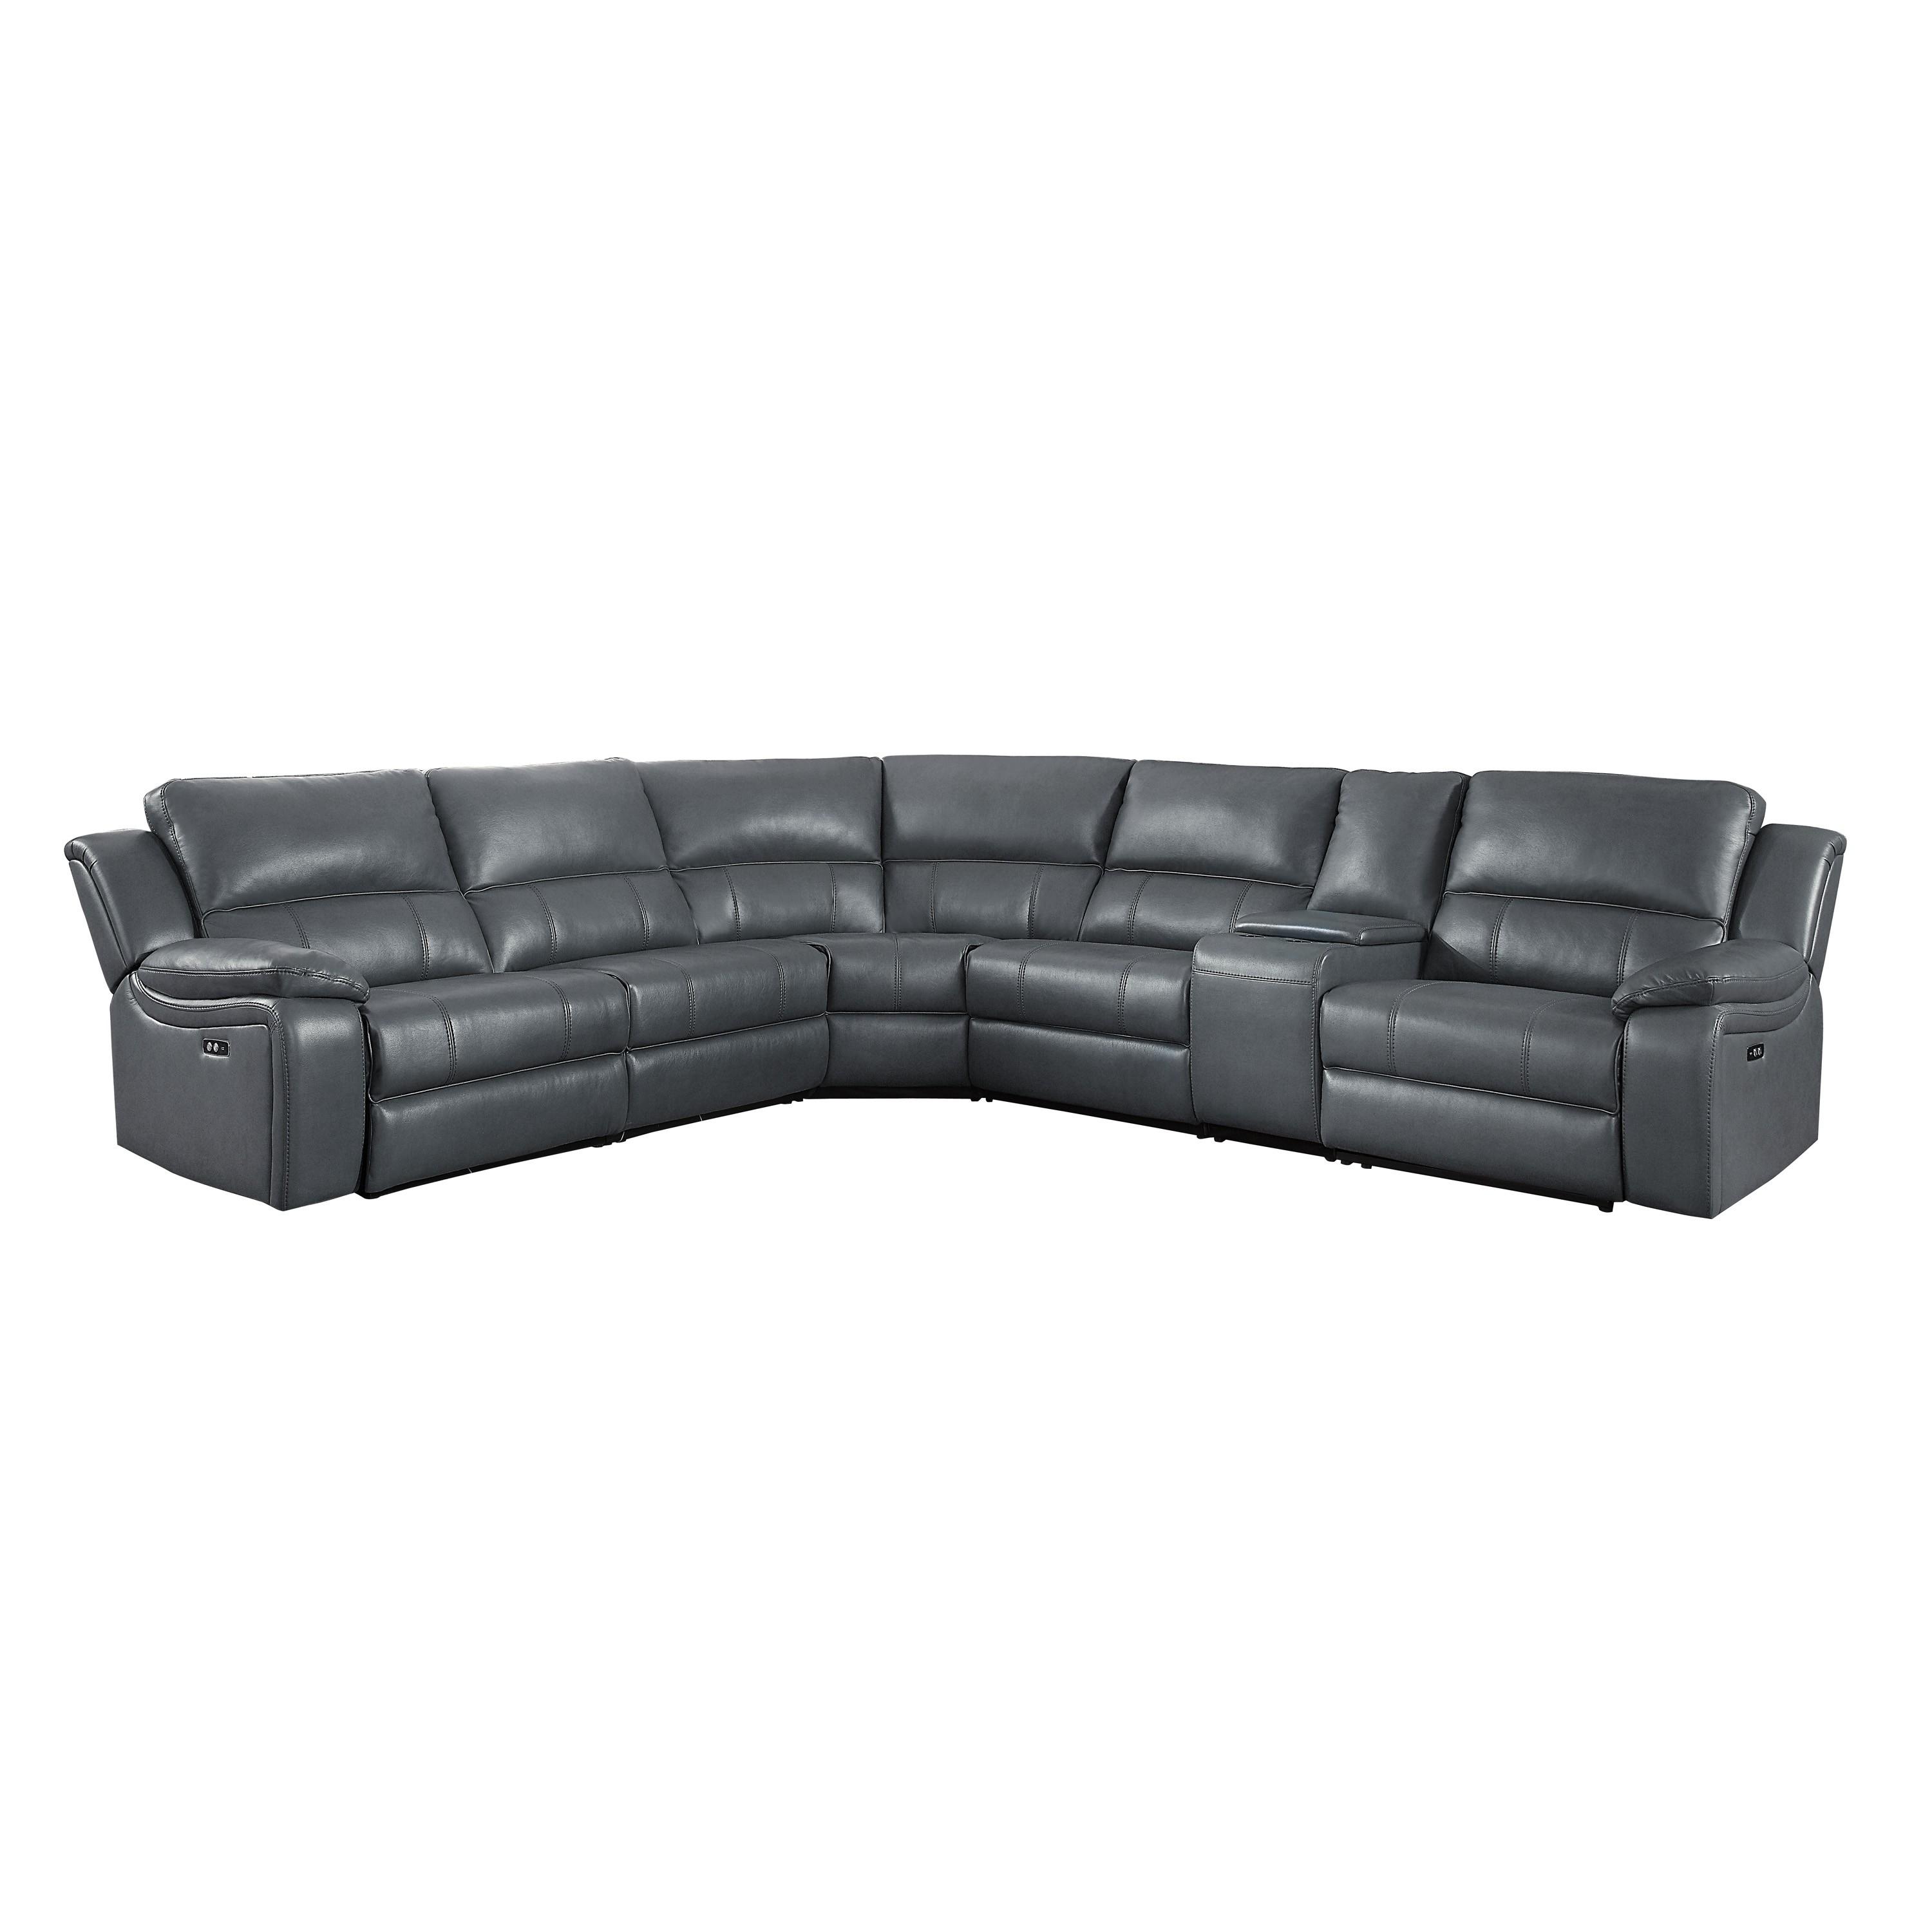 Modern Power Reclining Sectional 8260GY*6PW Falun 8260GY*6PW in Gray Faux Leather